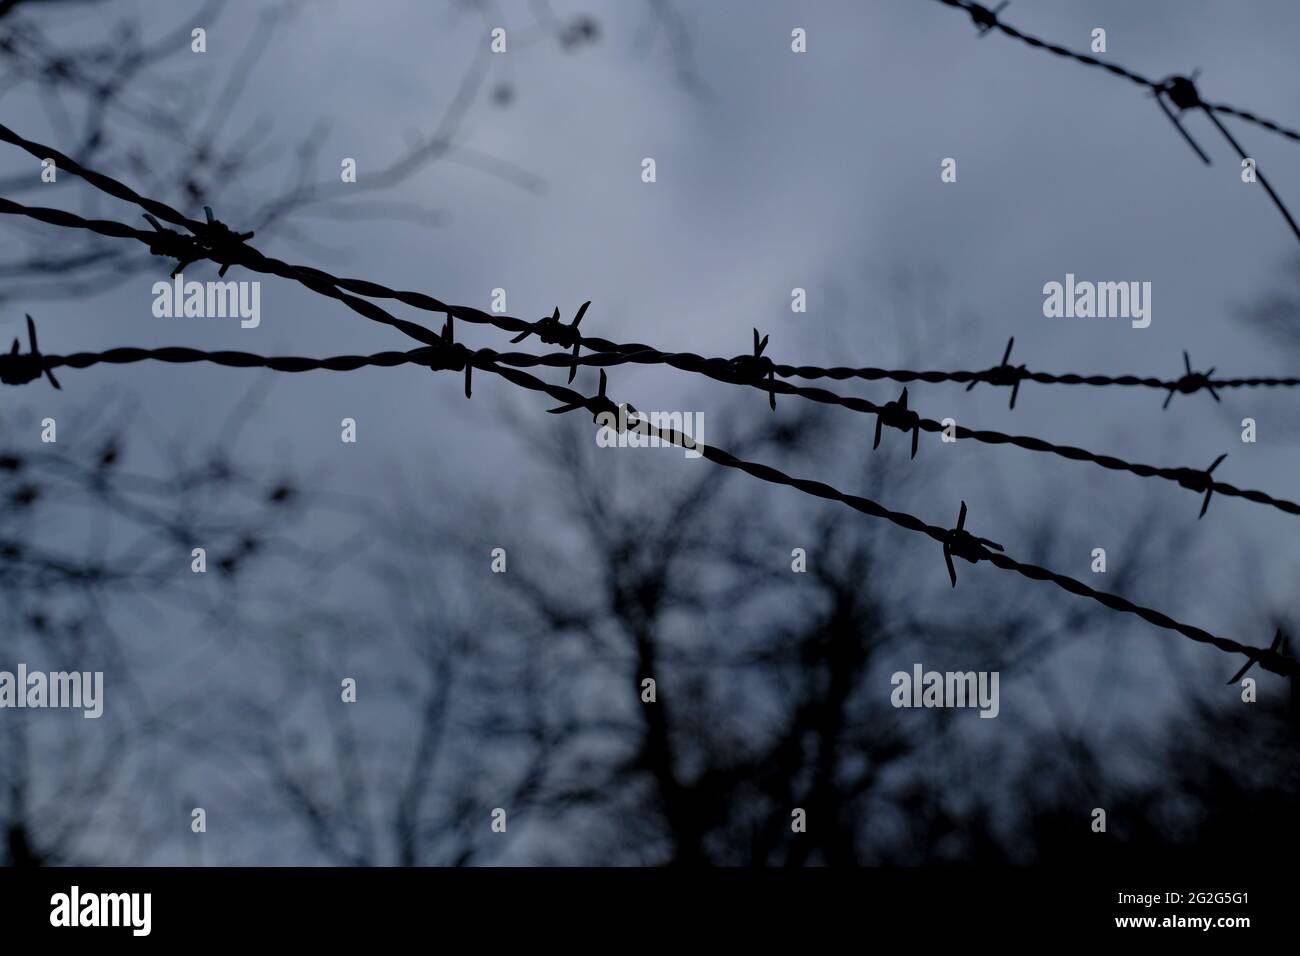 barbed wire against a gray sky and black tree silhouettes. Prison, security, military, boundary Stock Photo